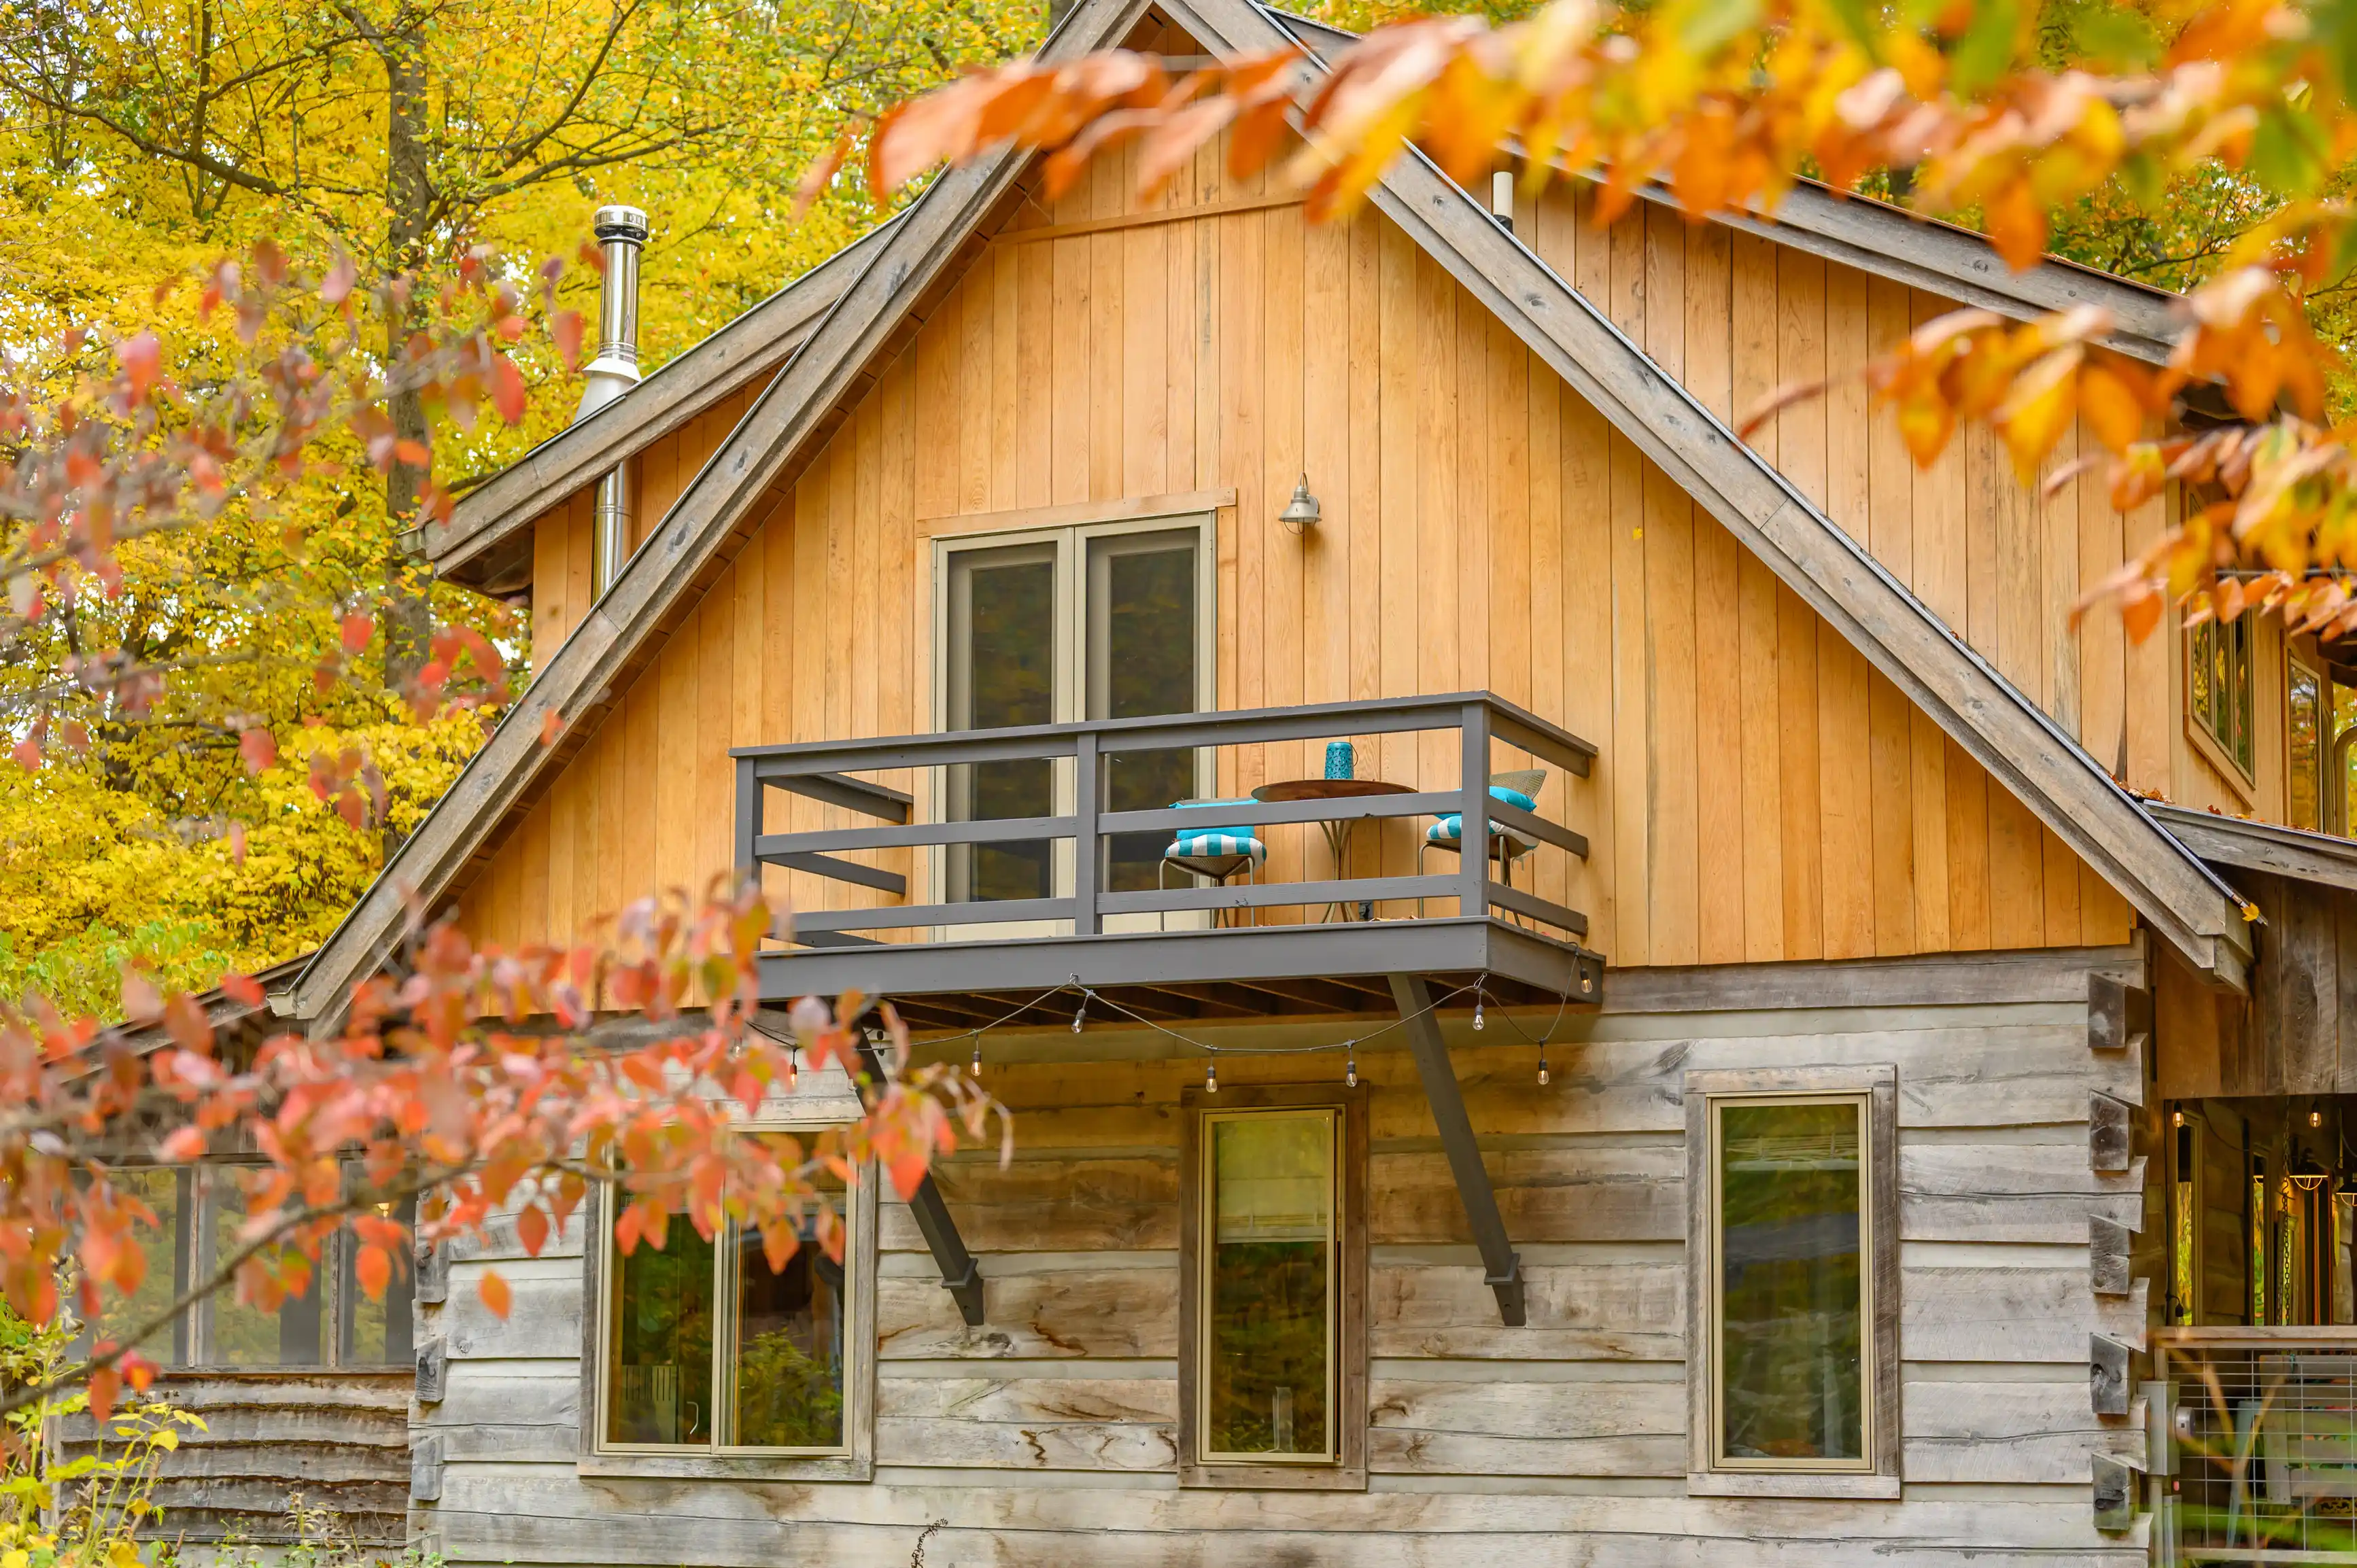 Wooden cabin with a balcony surrounded by autumn foliage, featuring a blue yoga mat.